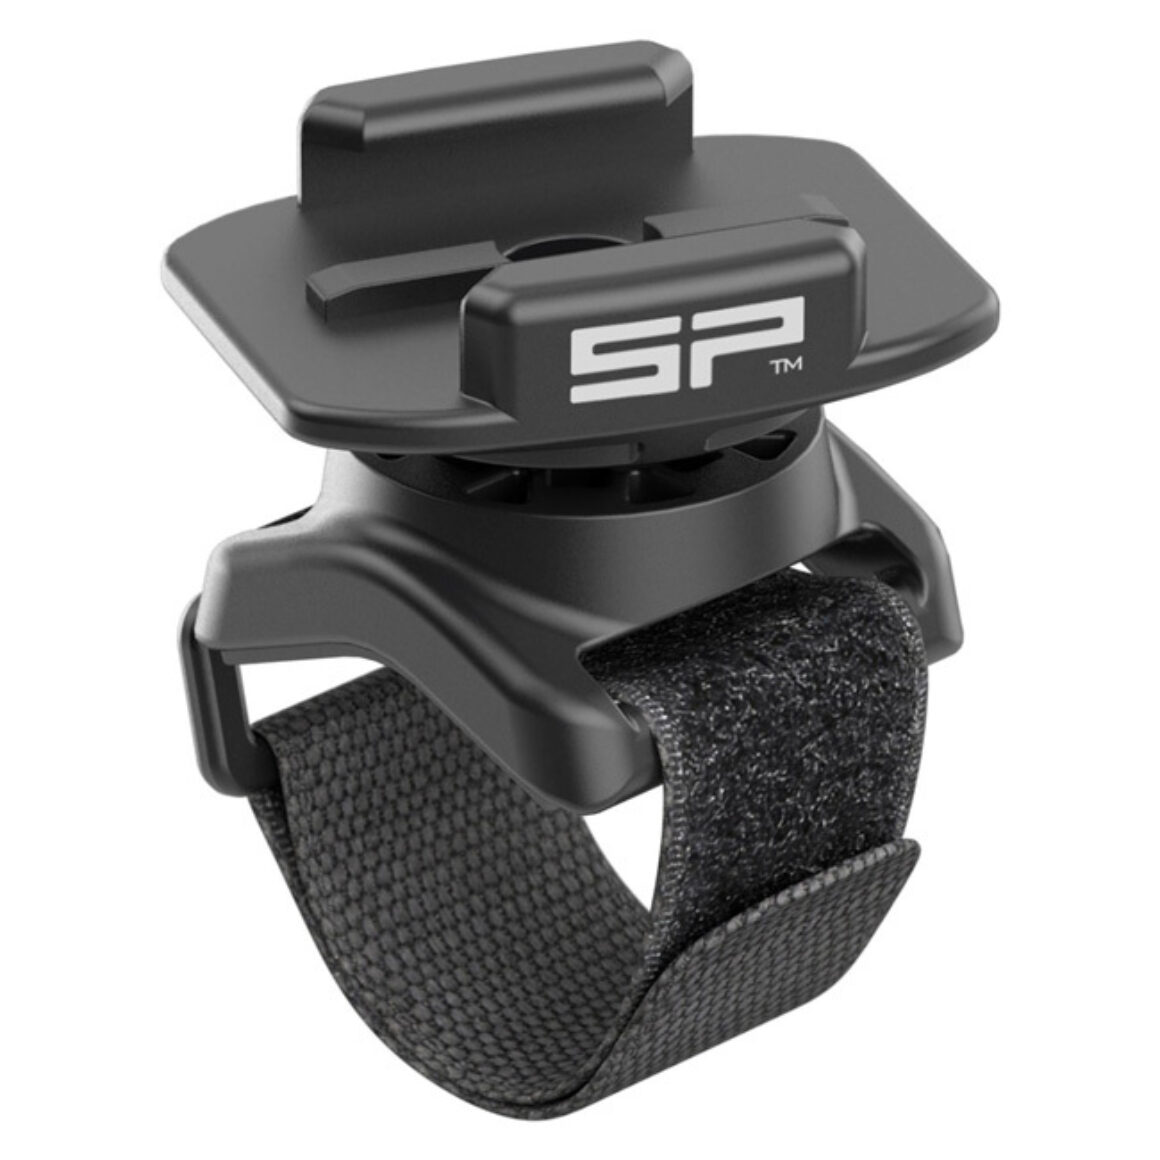 SP CONNECT Teled Sp Universal Mount